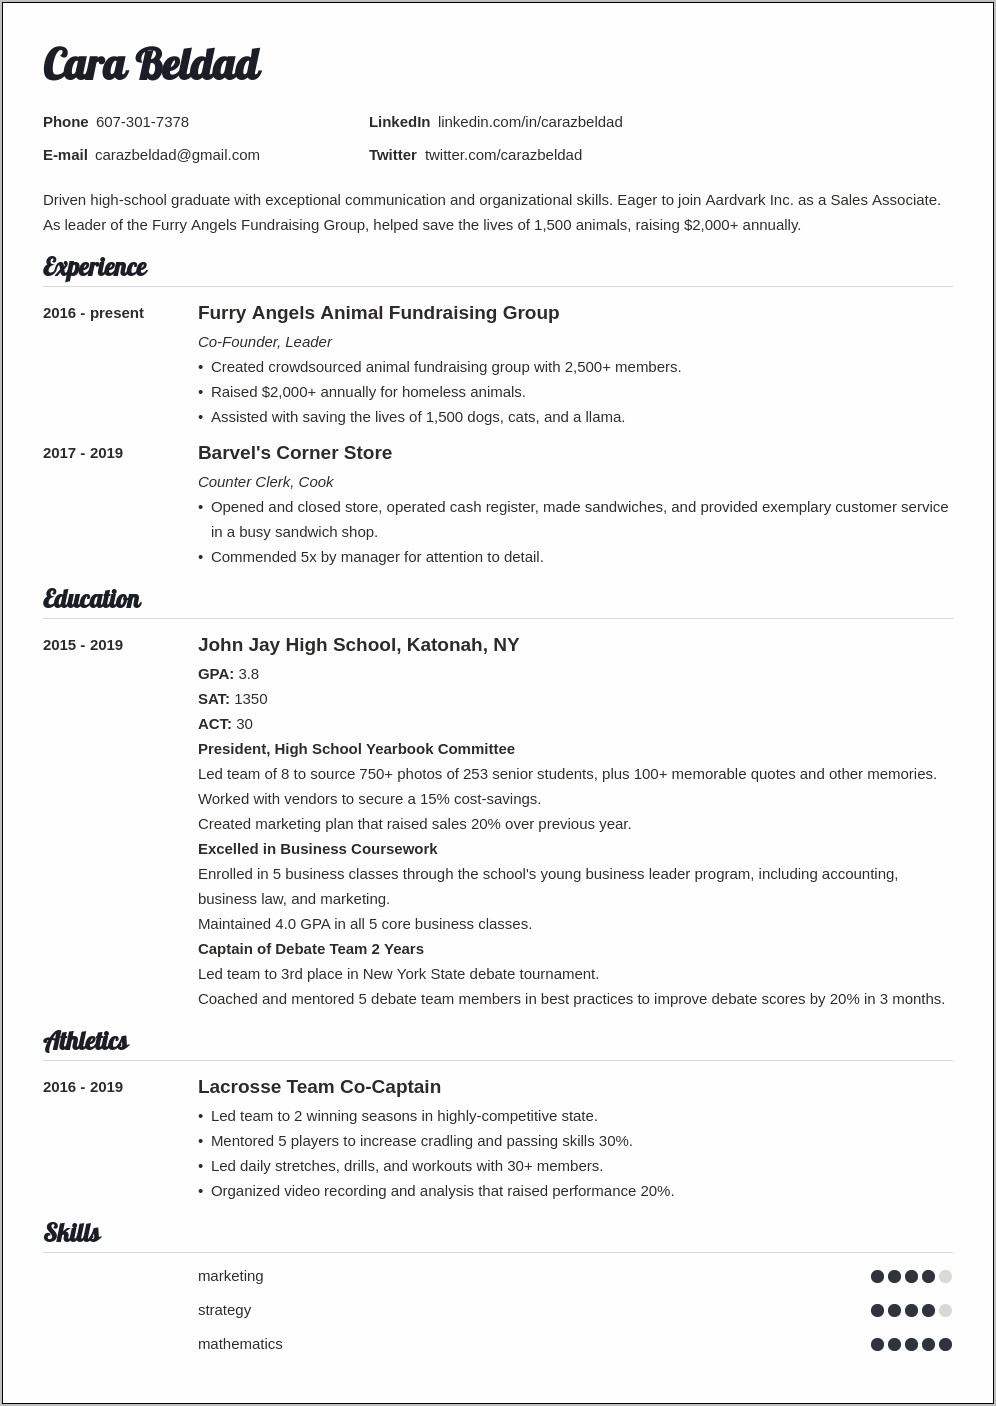 Generic Resume For High School Student